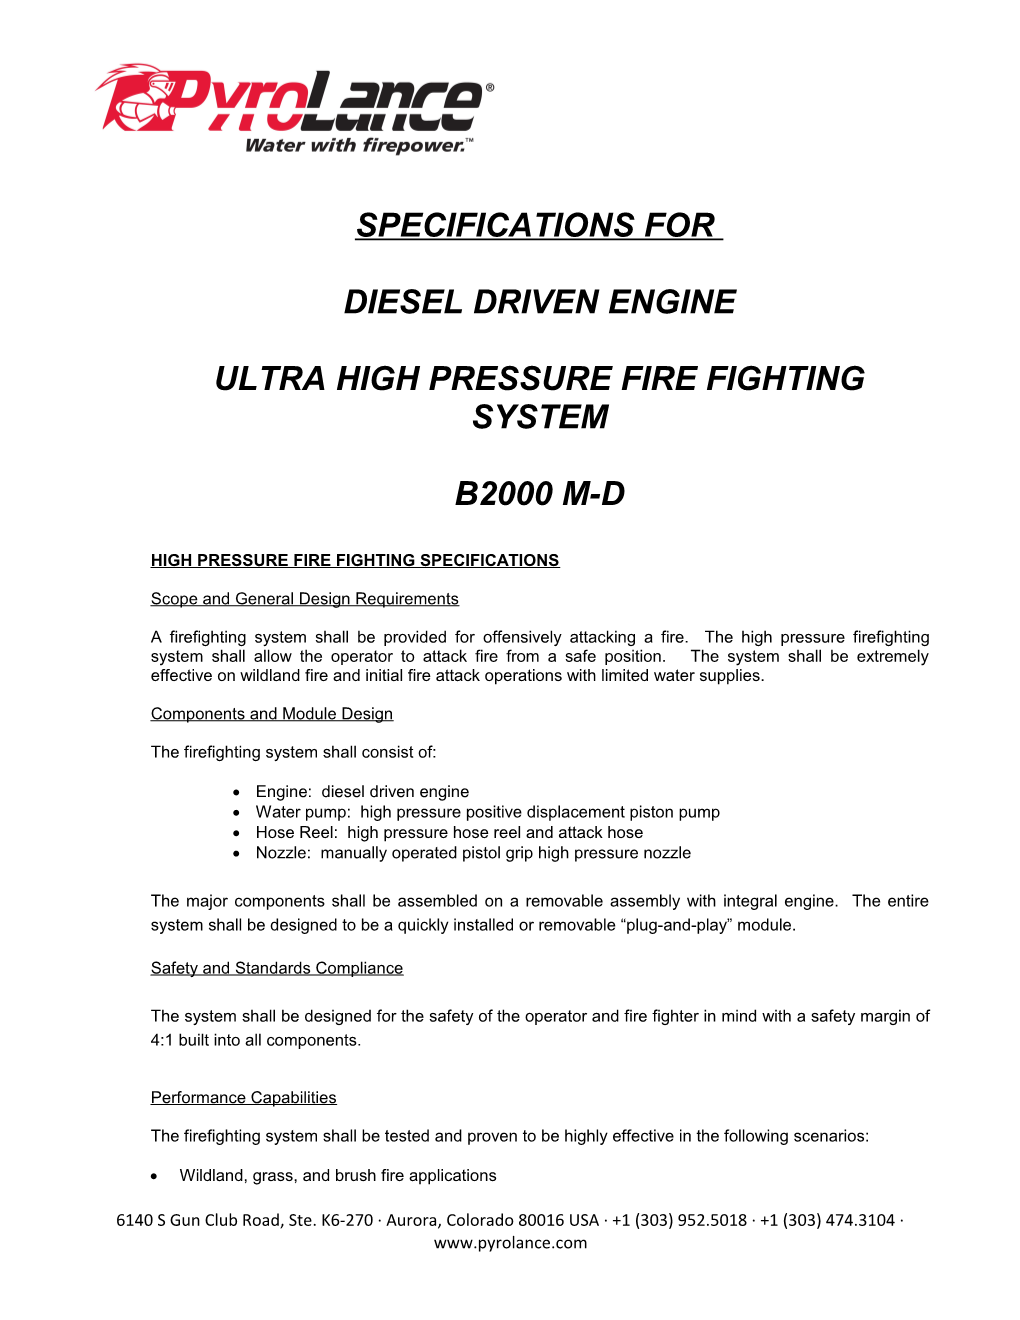 Ultra High Pressure Fire Fighting System